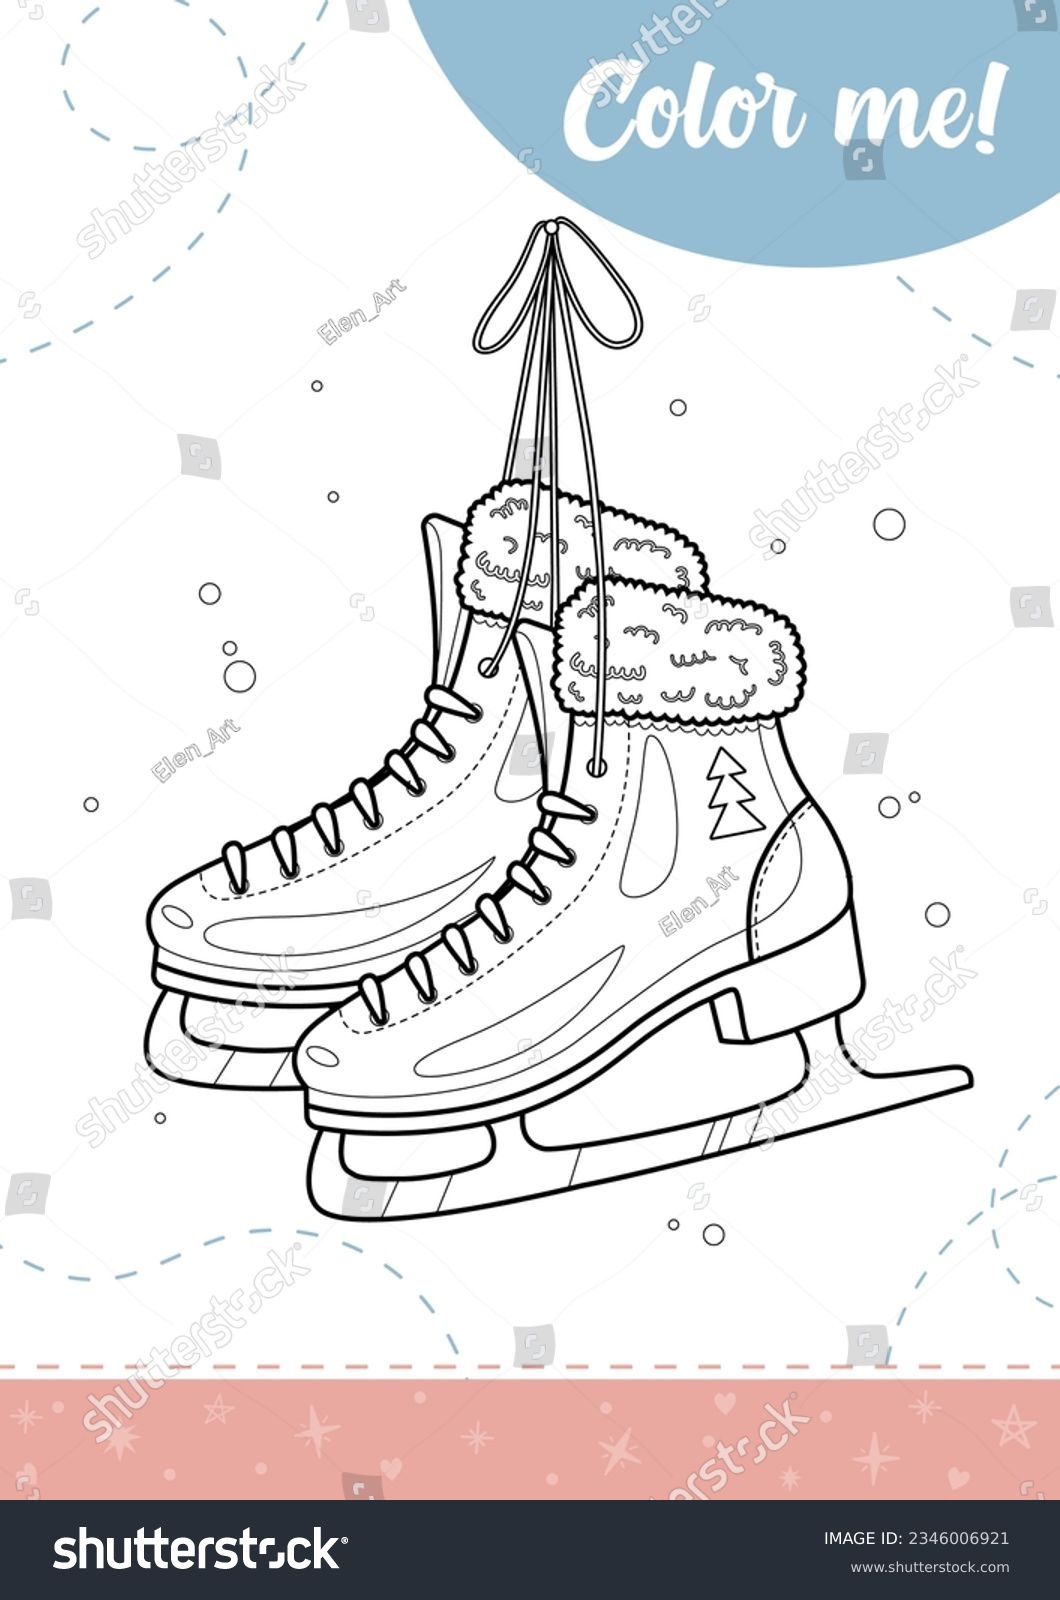 Coloring page kids ice skates a stock vector royalty free